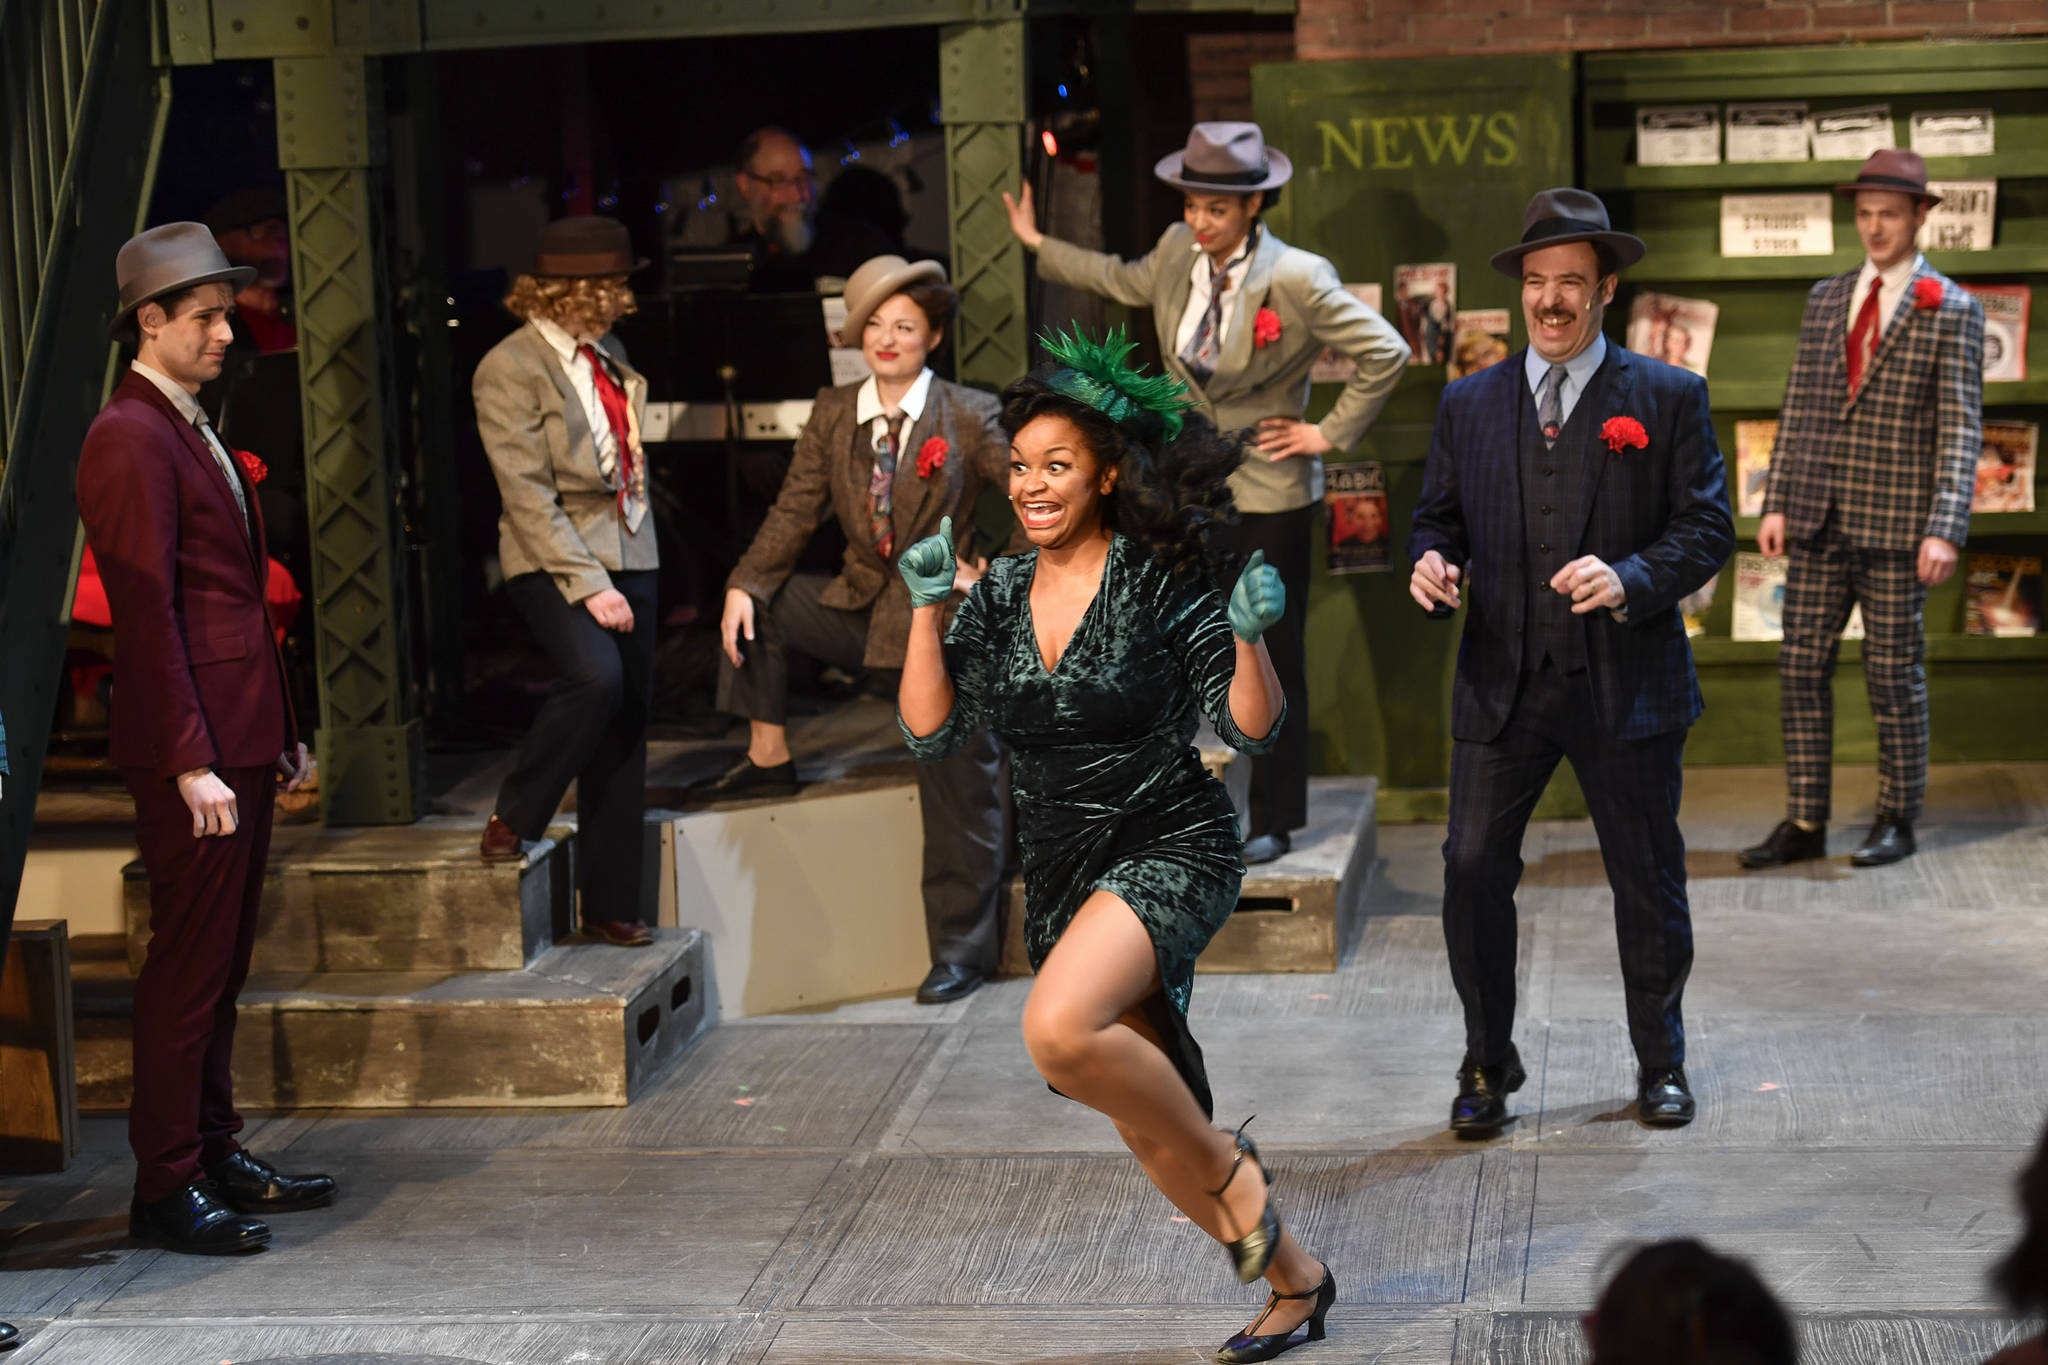 A performance of “Guys and Dolls” at Perseverance Theatre on Thursday, March 14, 2019. (Michael Penn | Juneau Empire File)